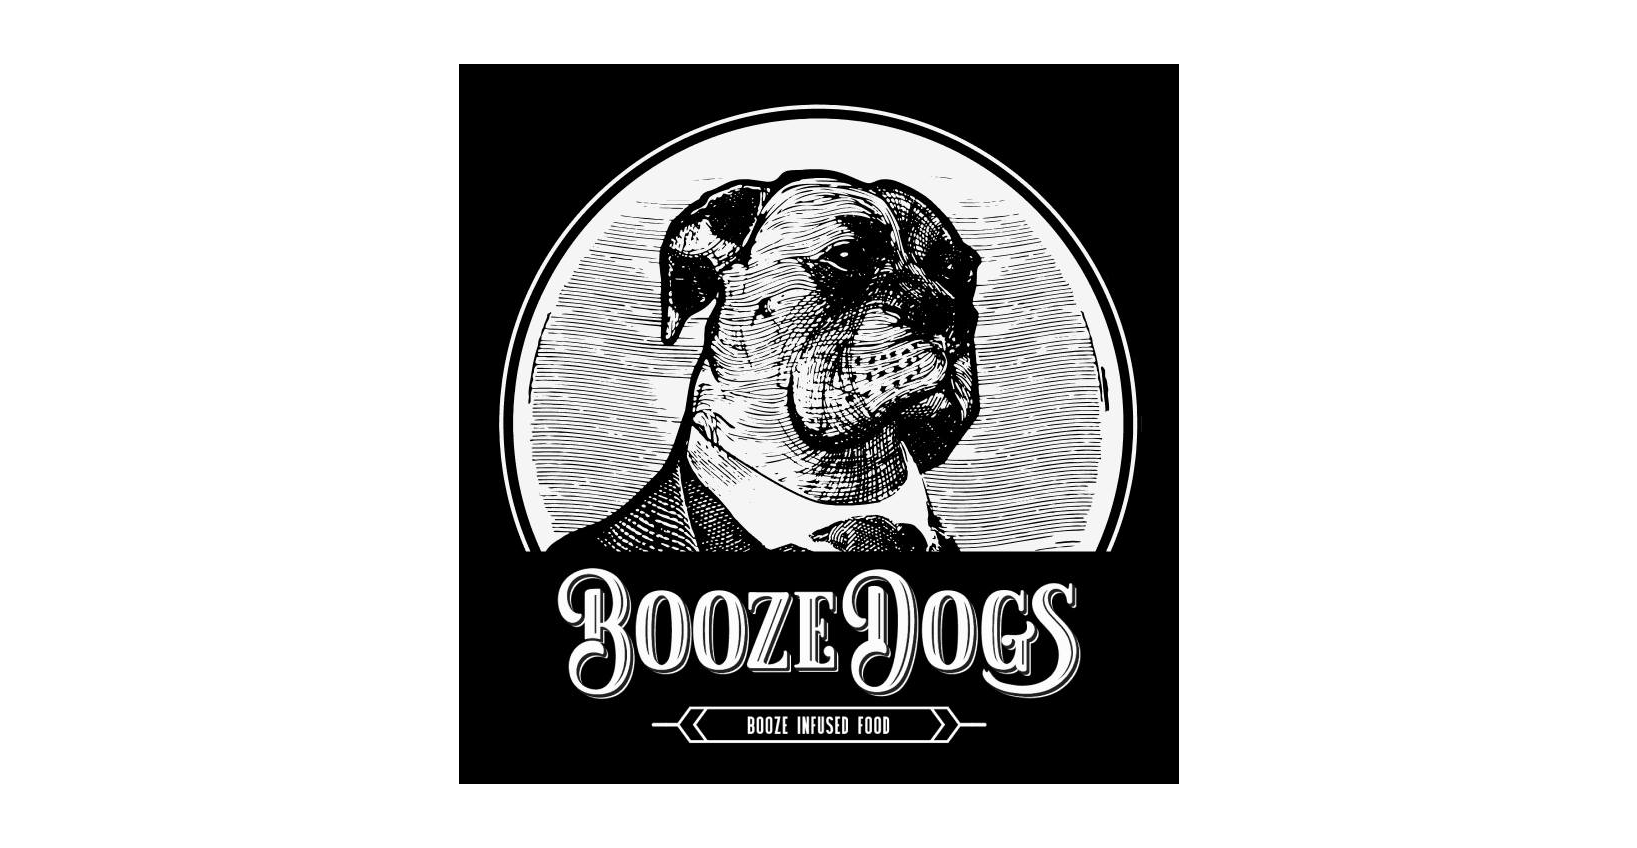 Spirited Meat, Spirited Moments - Booze Dogs